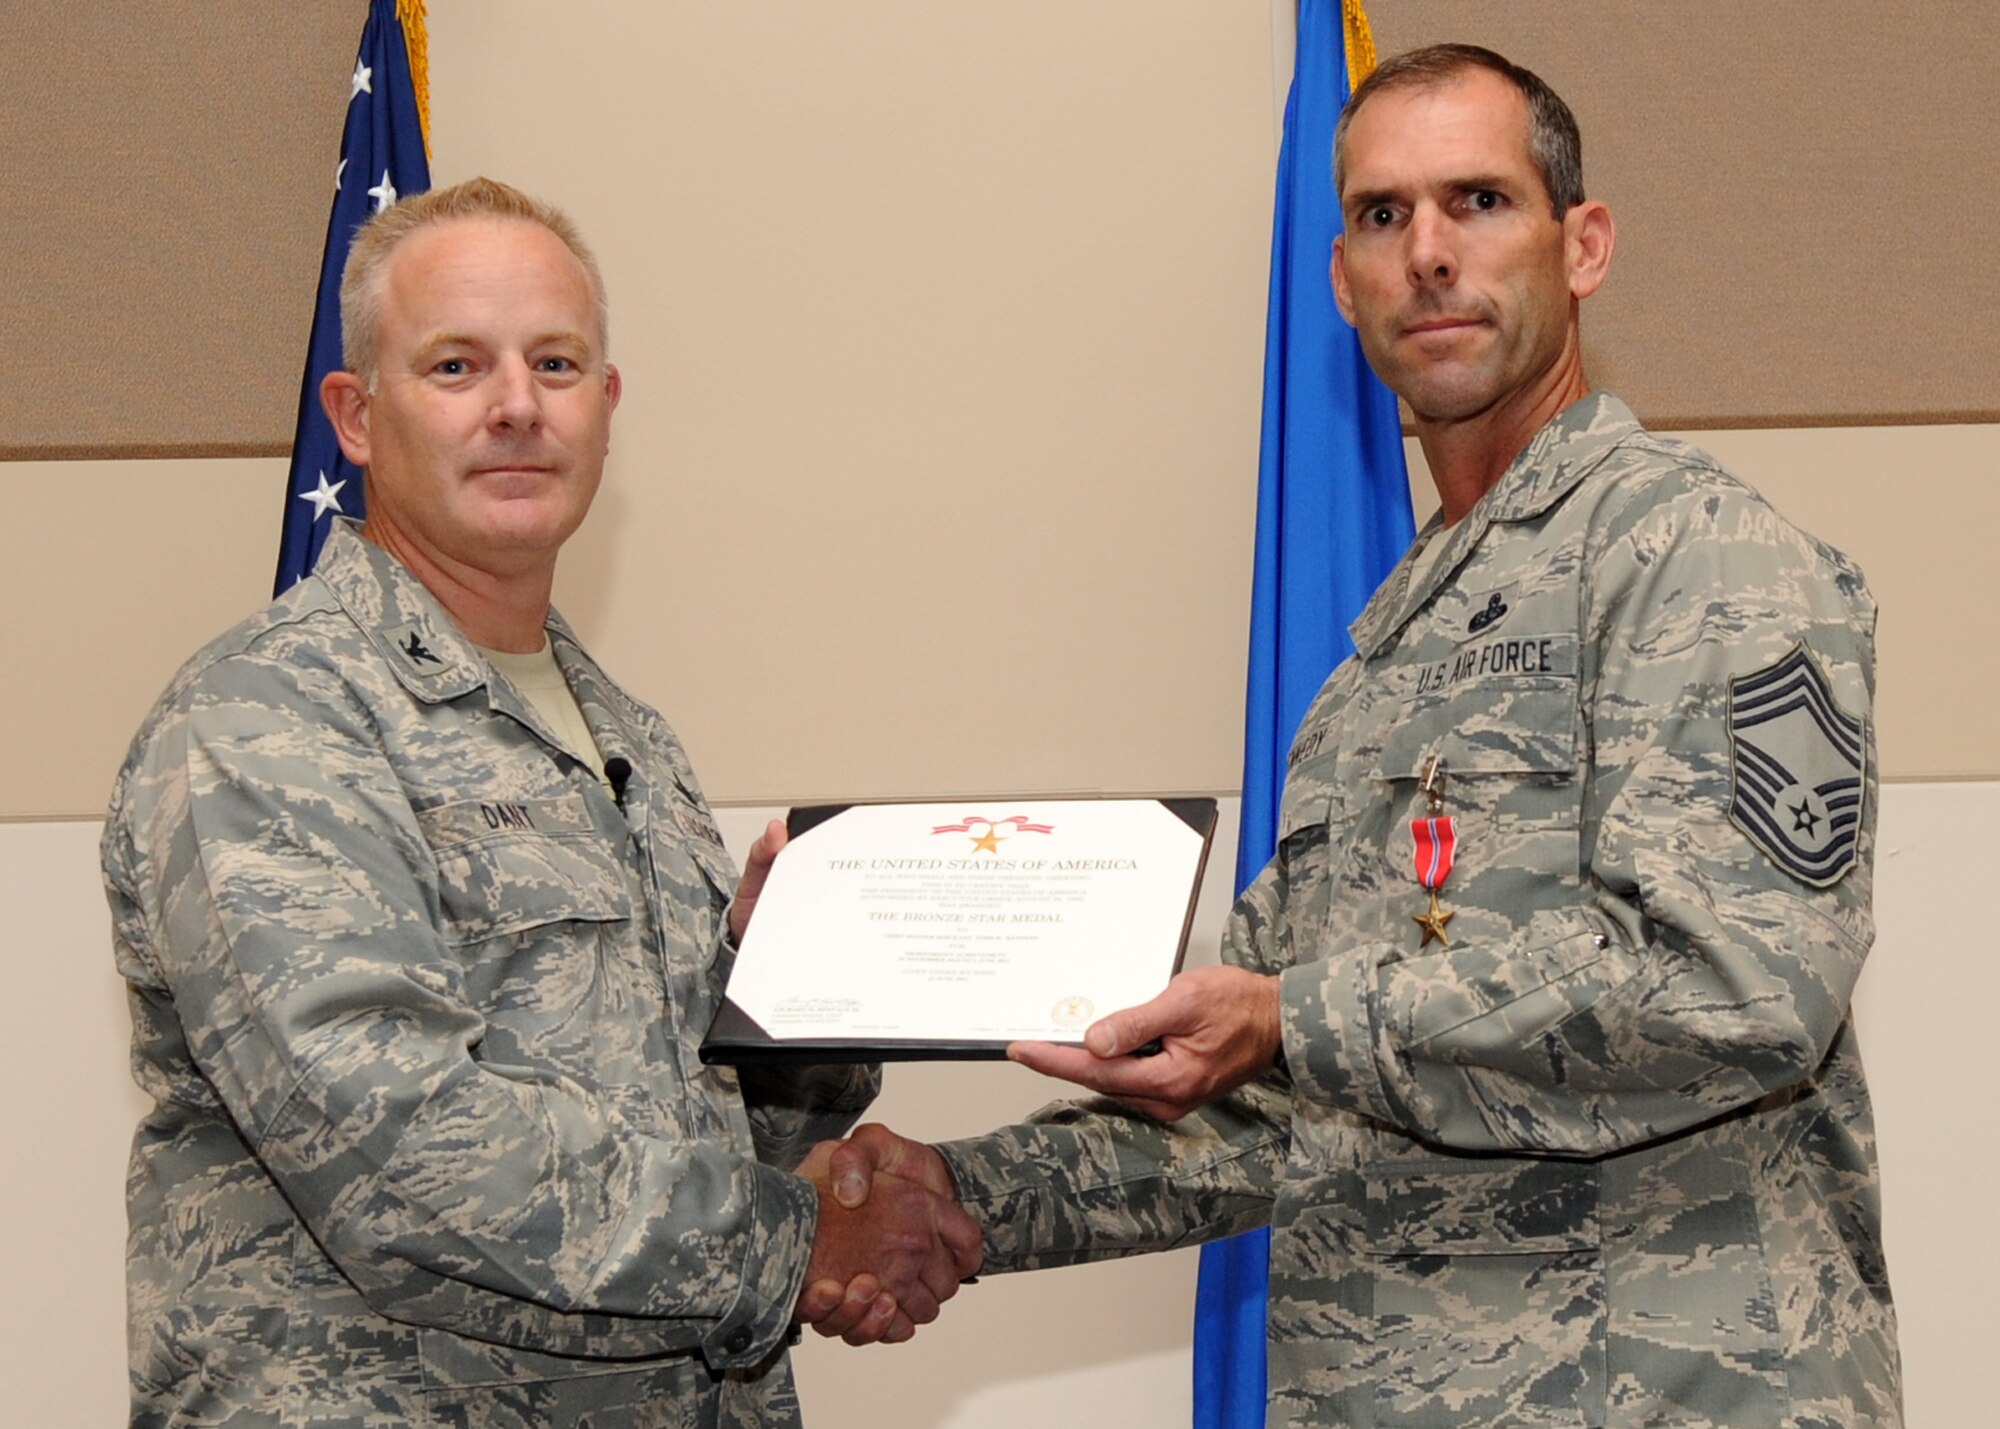 BUCKLEY AIR FORCE BASE, Colo. --  Colonel Daniel Dant, 460th Space Wing commander, awards the Bronze Star to Chief Master Sgt. Todd Kennedy, 460th Communications Squadron July 15, 2011. Kennedy received the Bronze Star for leading his troops in a combat environment. His exceptional leadership and battlefield presence were crucial to the squadron's mission capability as well as the integrated execution of joint and coalition counter-insurgency operations. (U.S. Air Force photo by Airman1st Class Marcy Glass)
